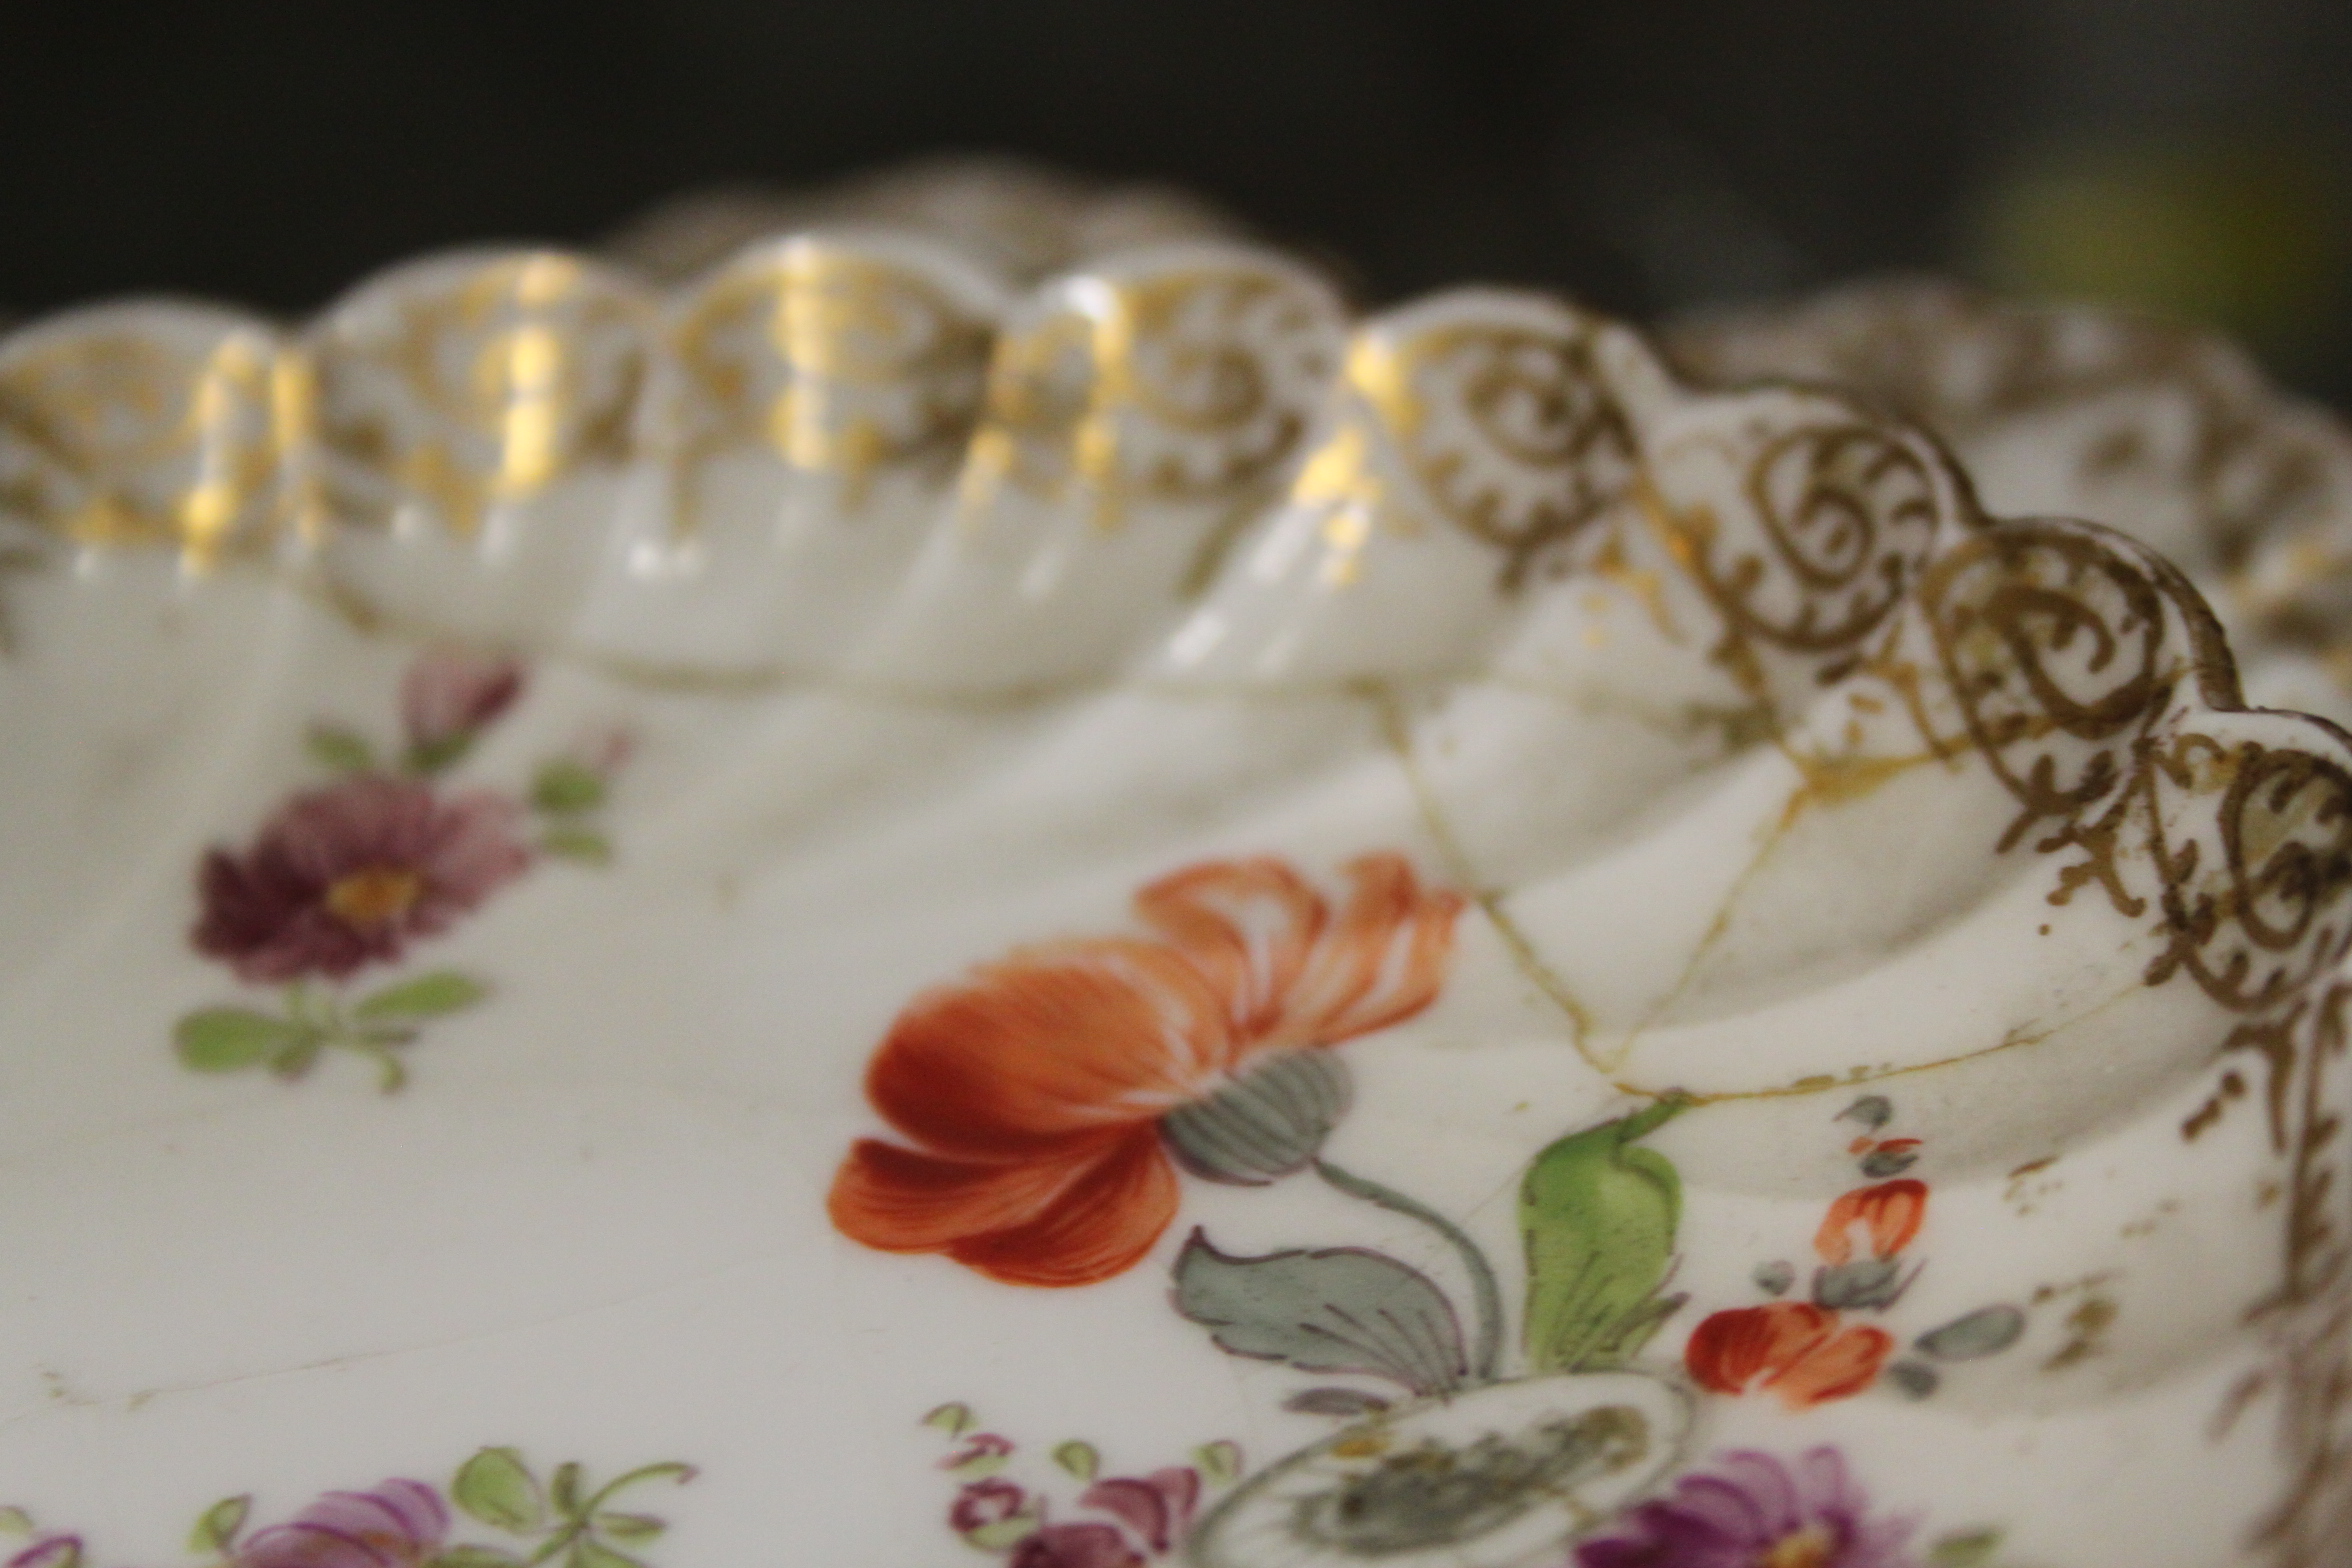 An 18th century English porcelain tea bowl, decorated insects and flowers, a Ridgeway jug with - Image 24 of 29